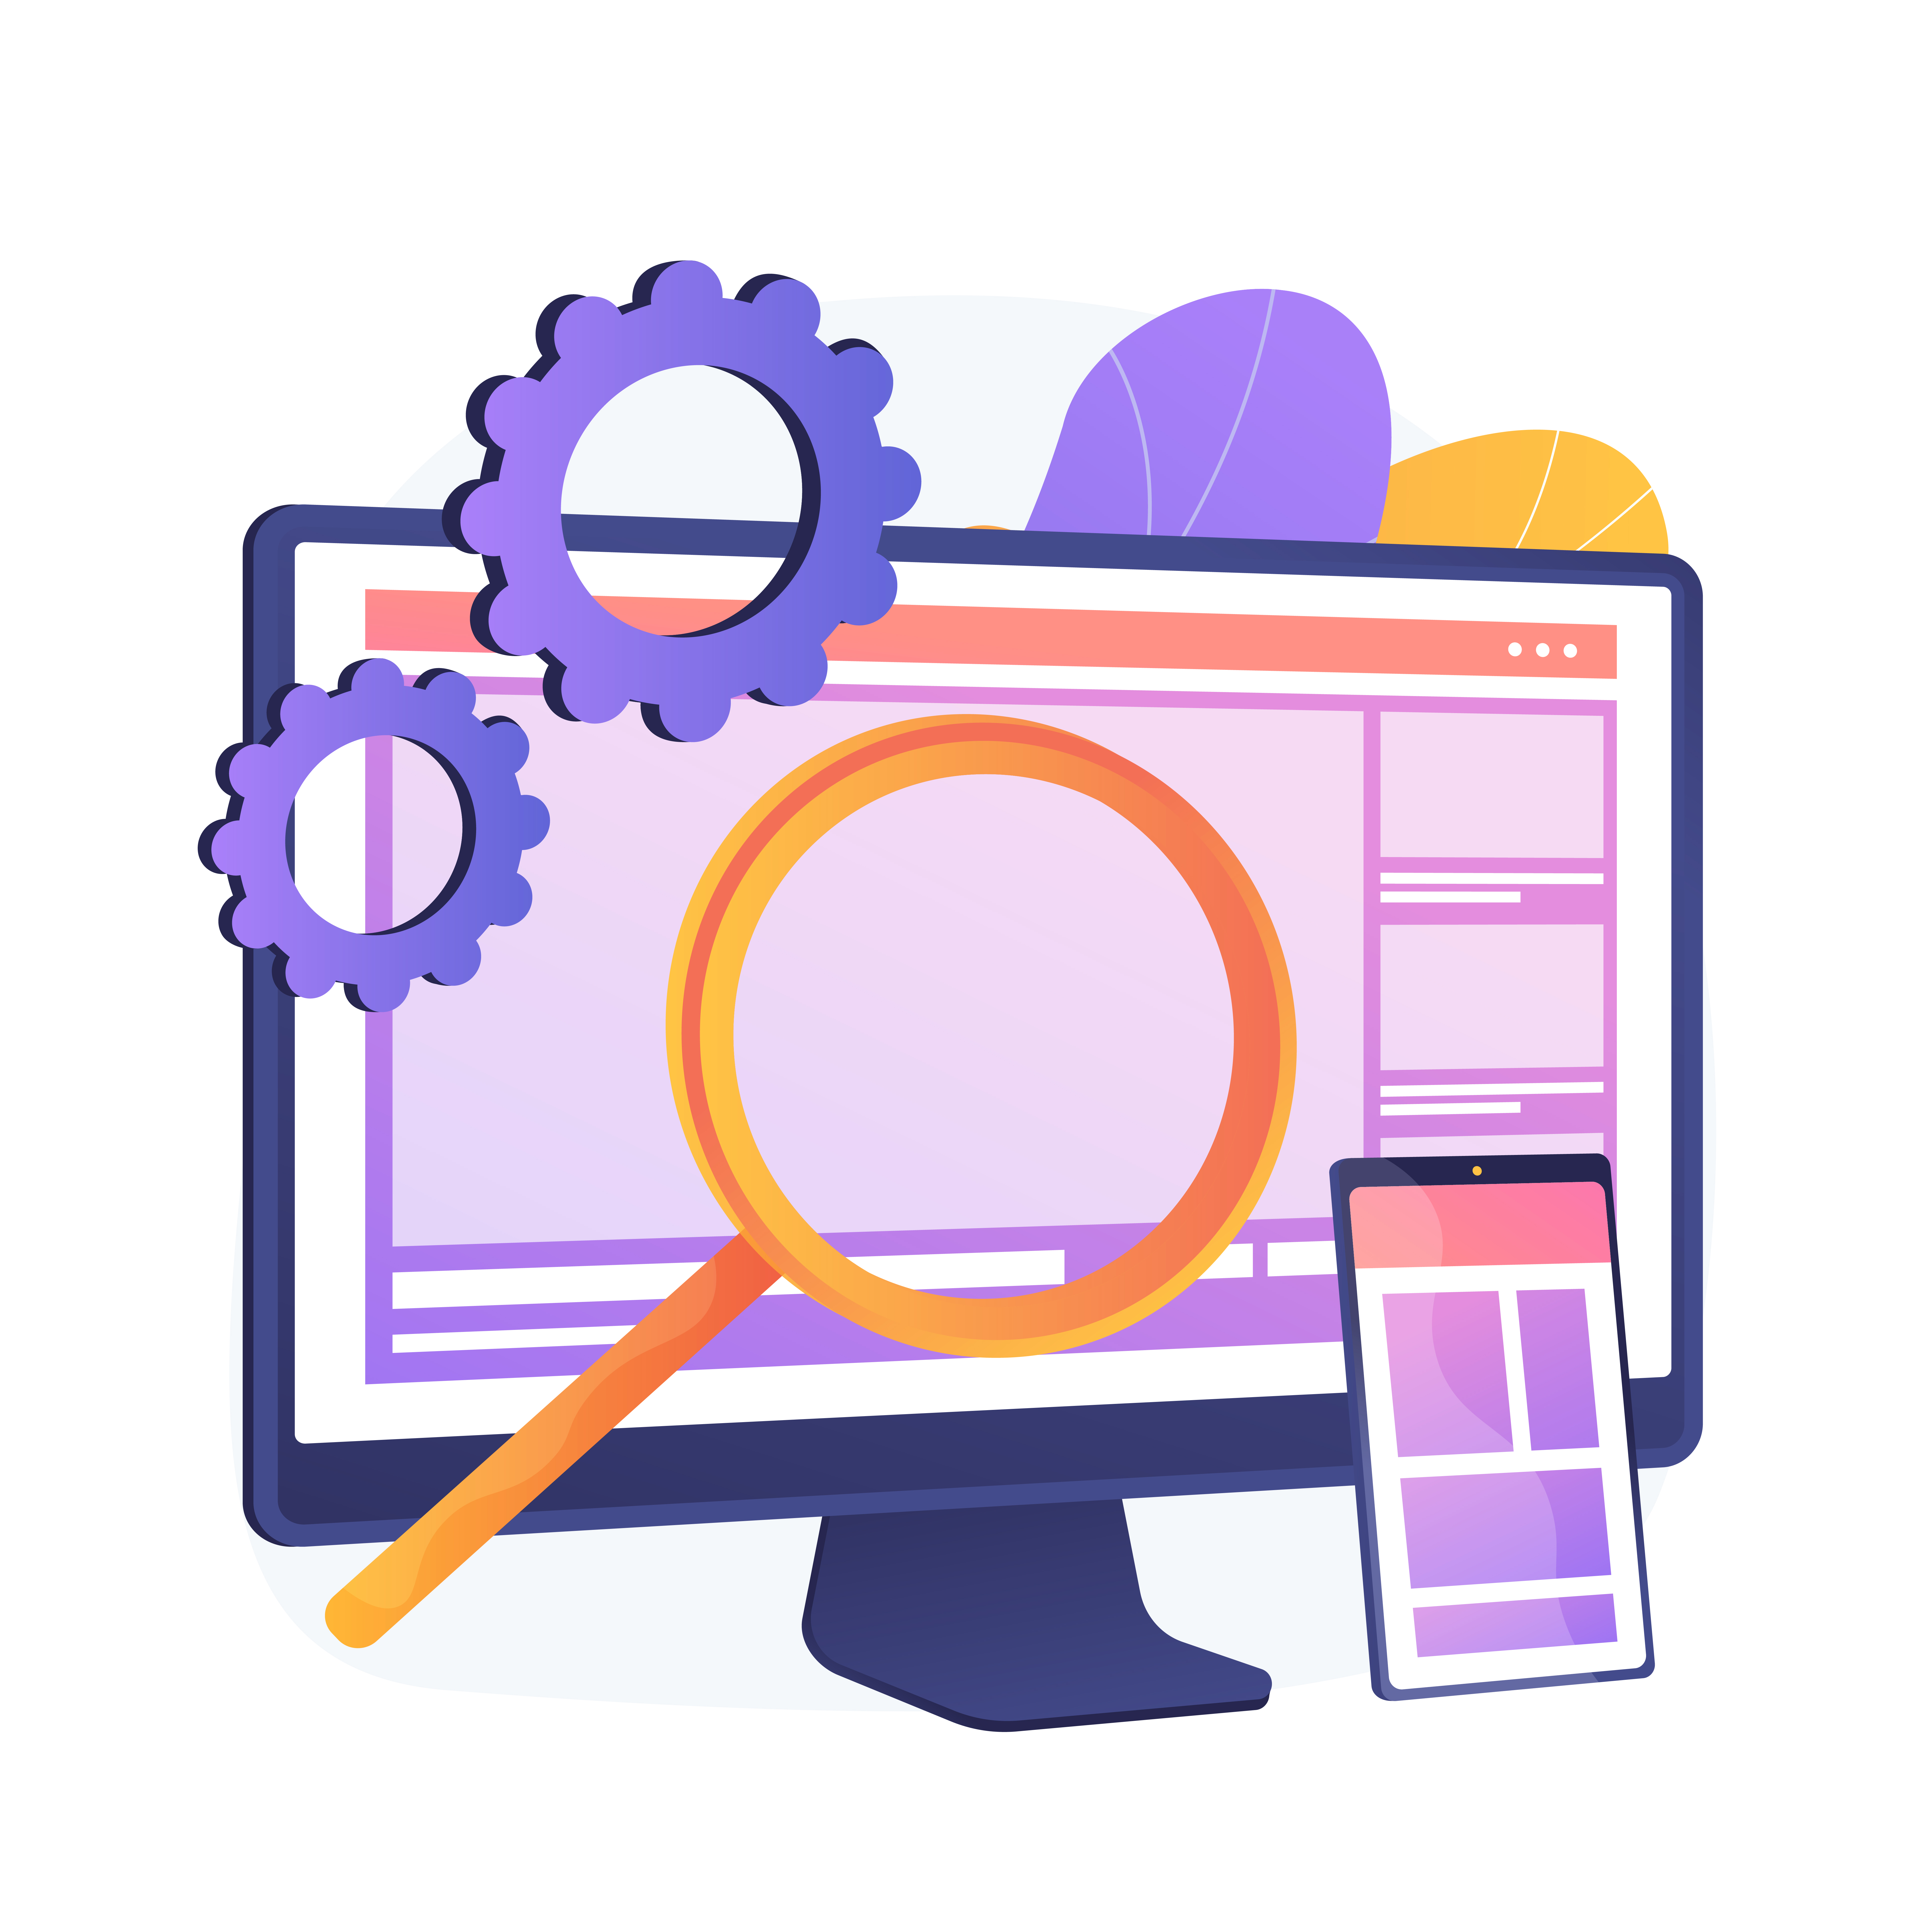 Web design. Production and maintenance of websites. Web graphic, interface design, responsive website. Software engineering and development colorful icon. Vector isolated concept metaphor illustration